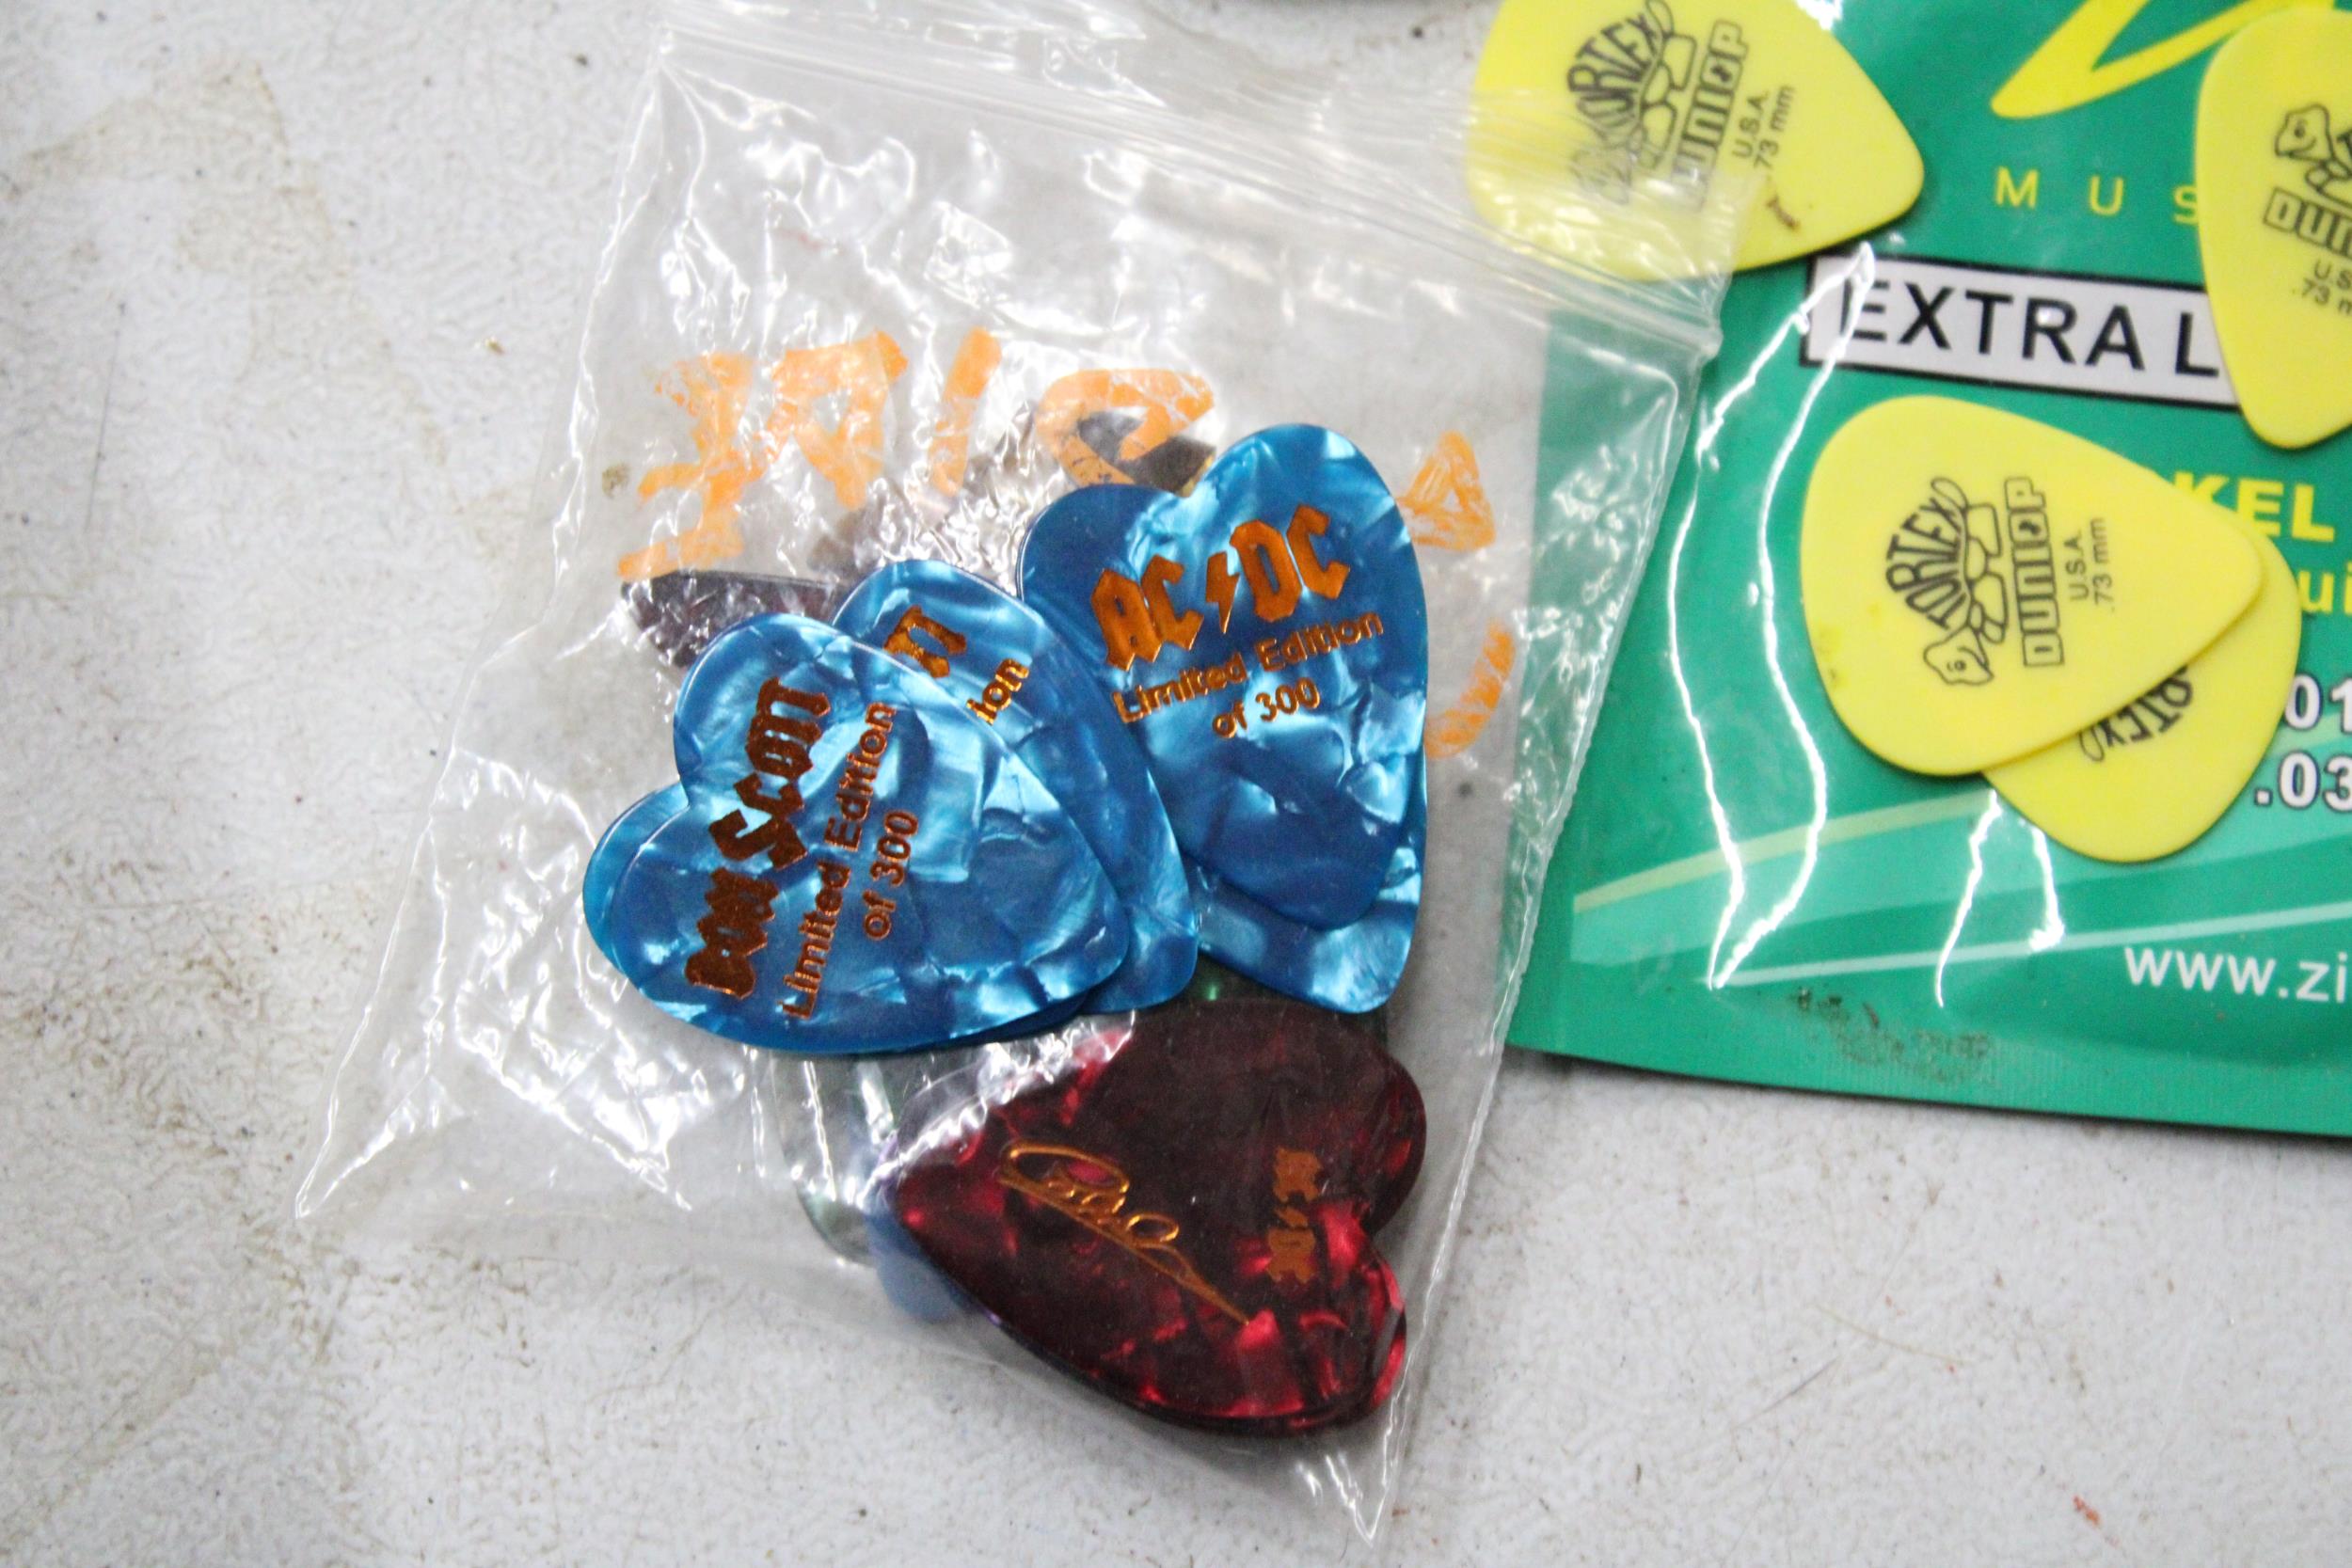 A QUANTITY OF ELECTRIC GUITAR STRINGS AND PLECTRUMS - Image 3 of 5